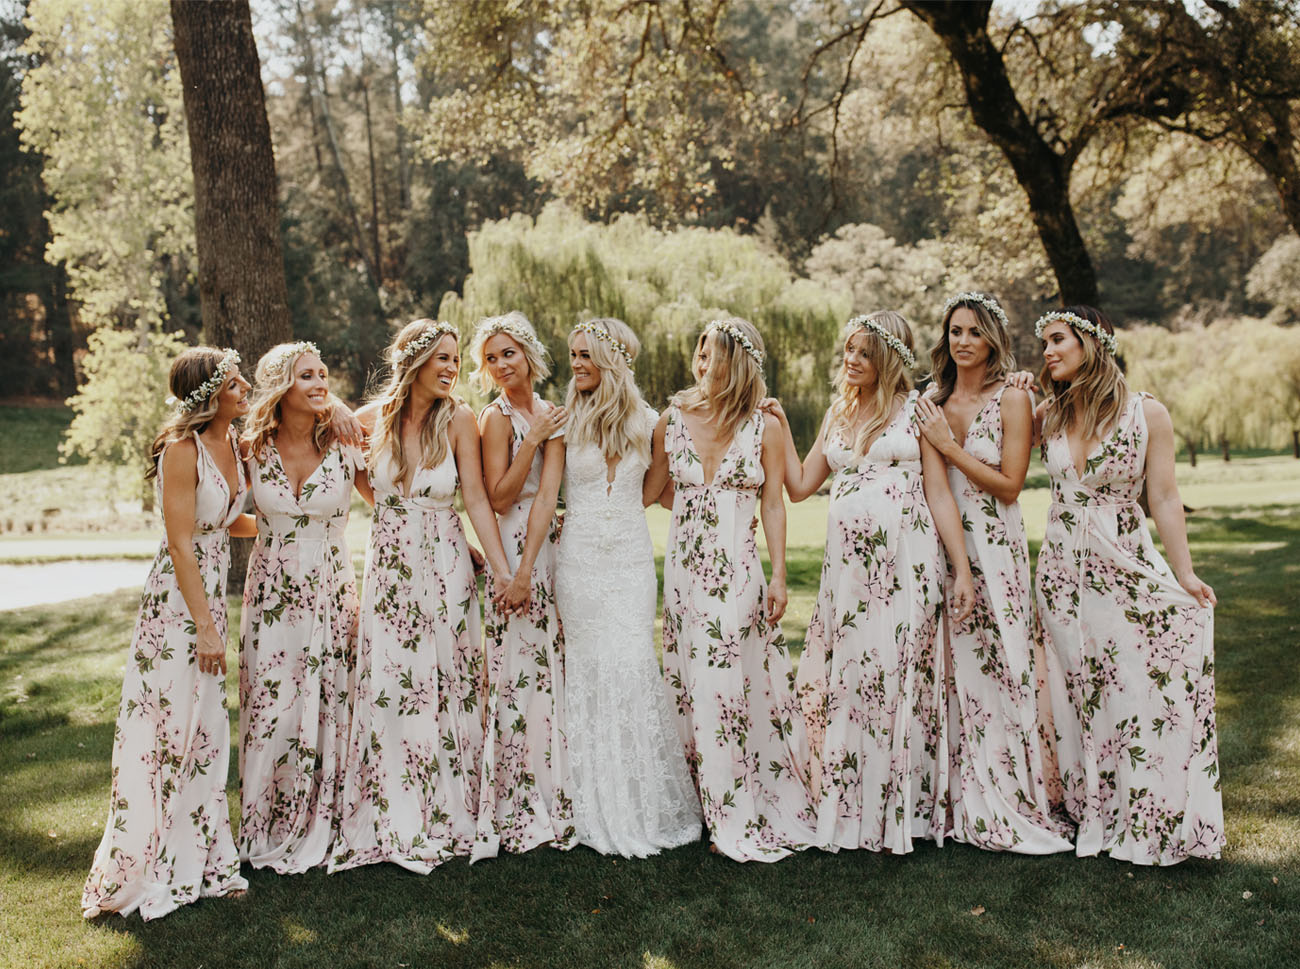 Bride and bridesmaid portrait. Bride wears a long lace dress and bridesmaids wear white dresses with blush flowers and floral crowns.